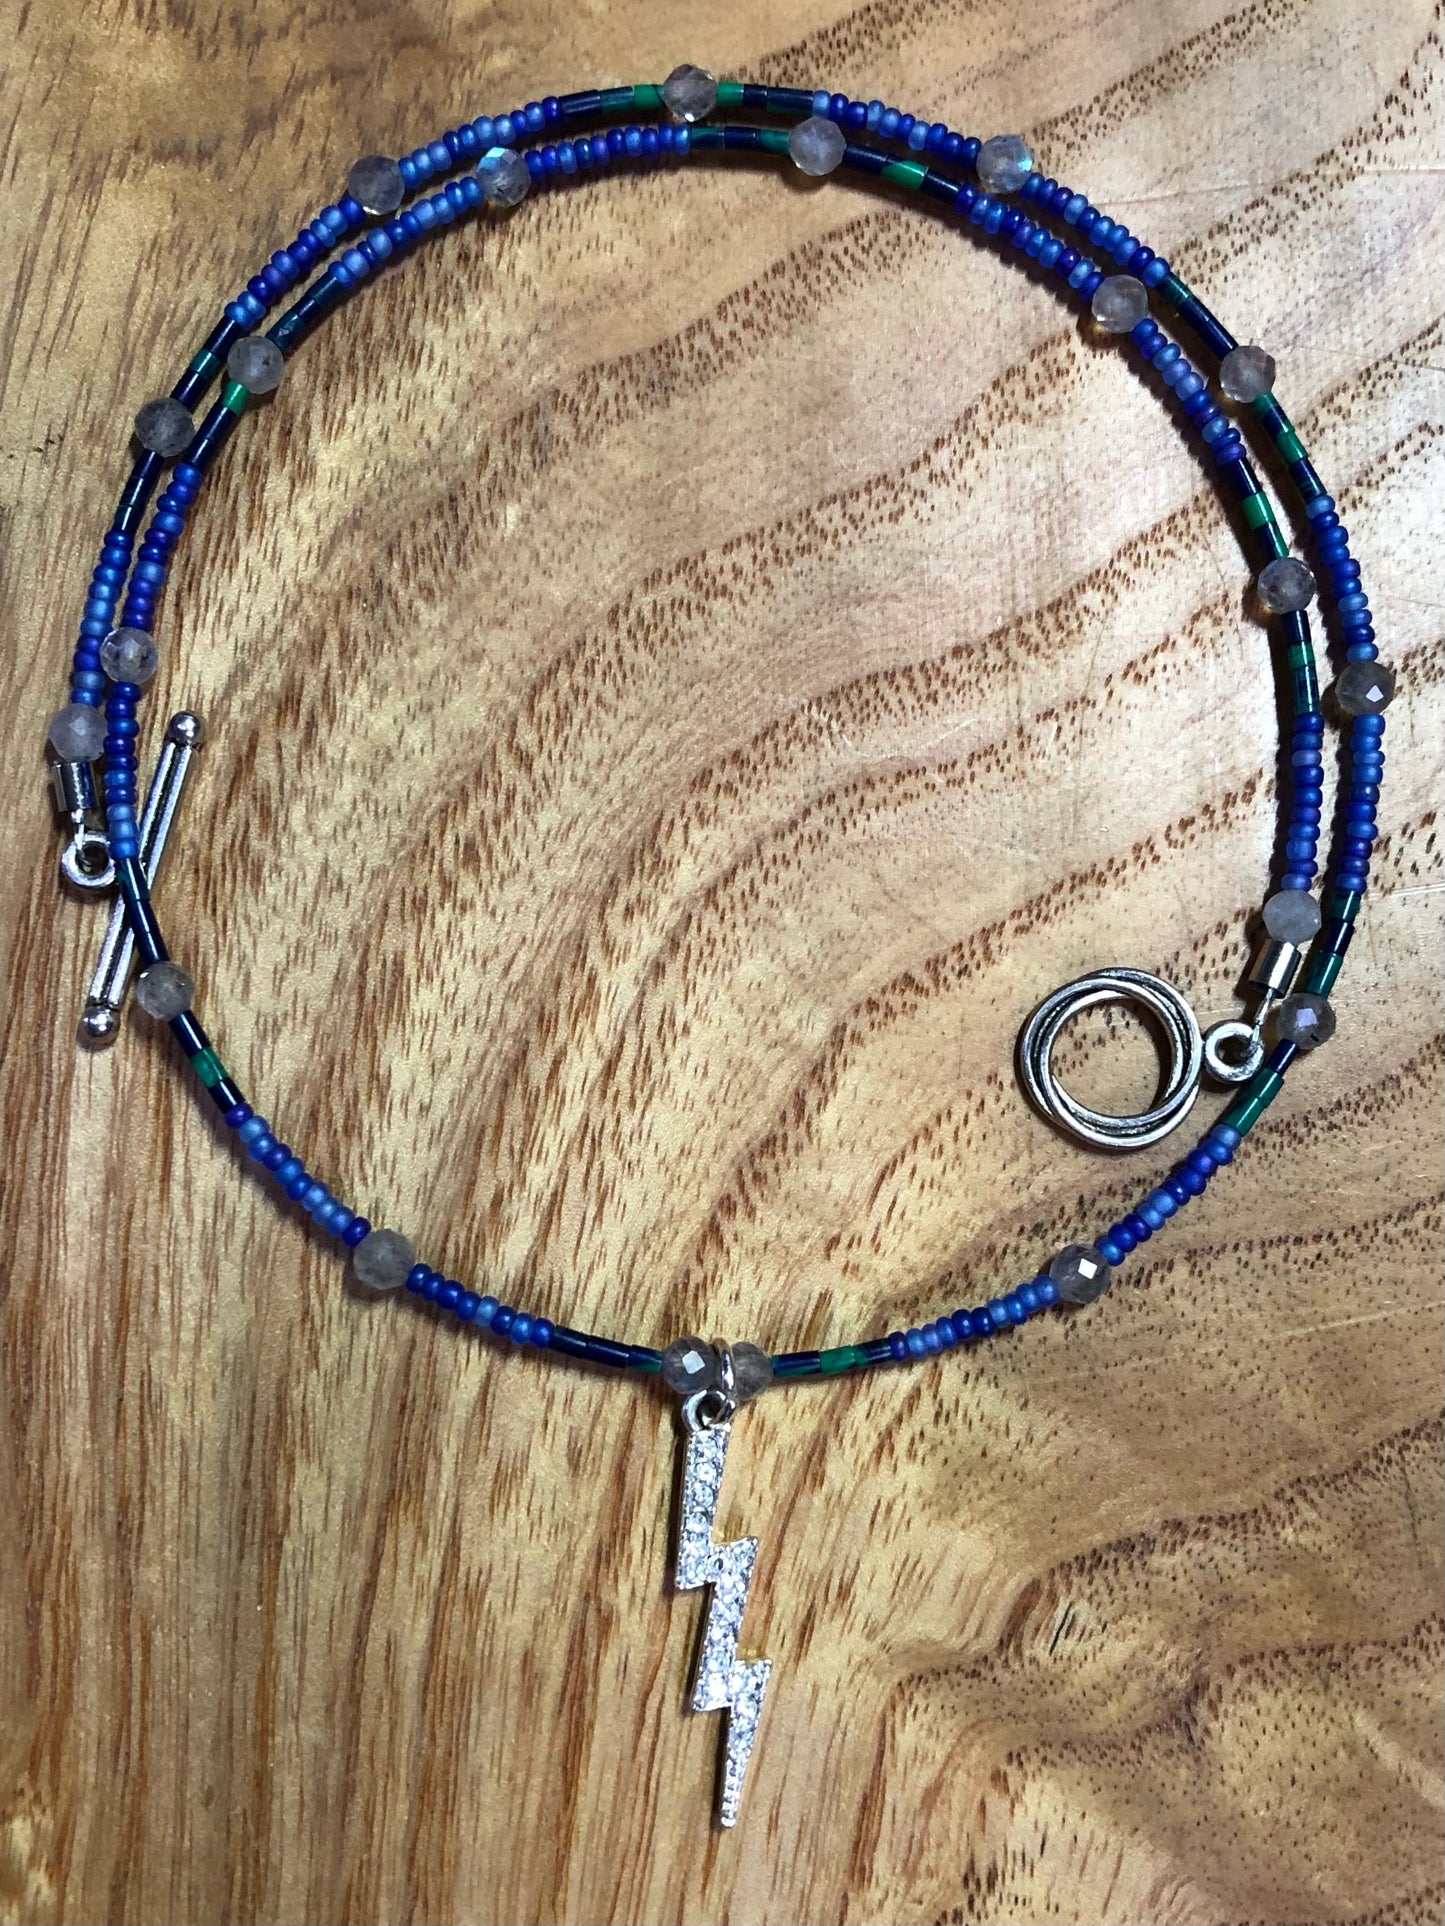 Necklace with 29mm silver plated with clear crystal lightning bolt charm, lapis and malachite tube beads, blue glass seed beads, and labradorite beads.